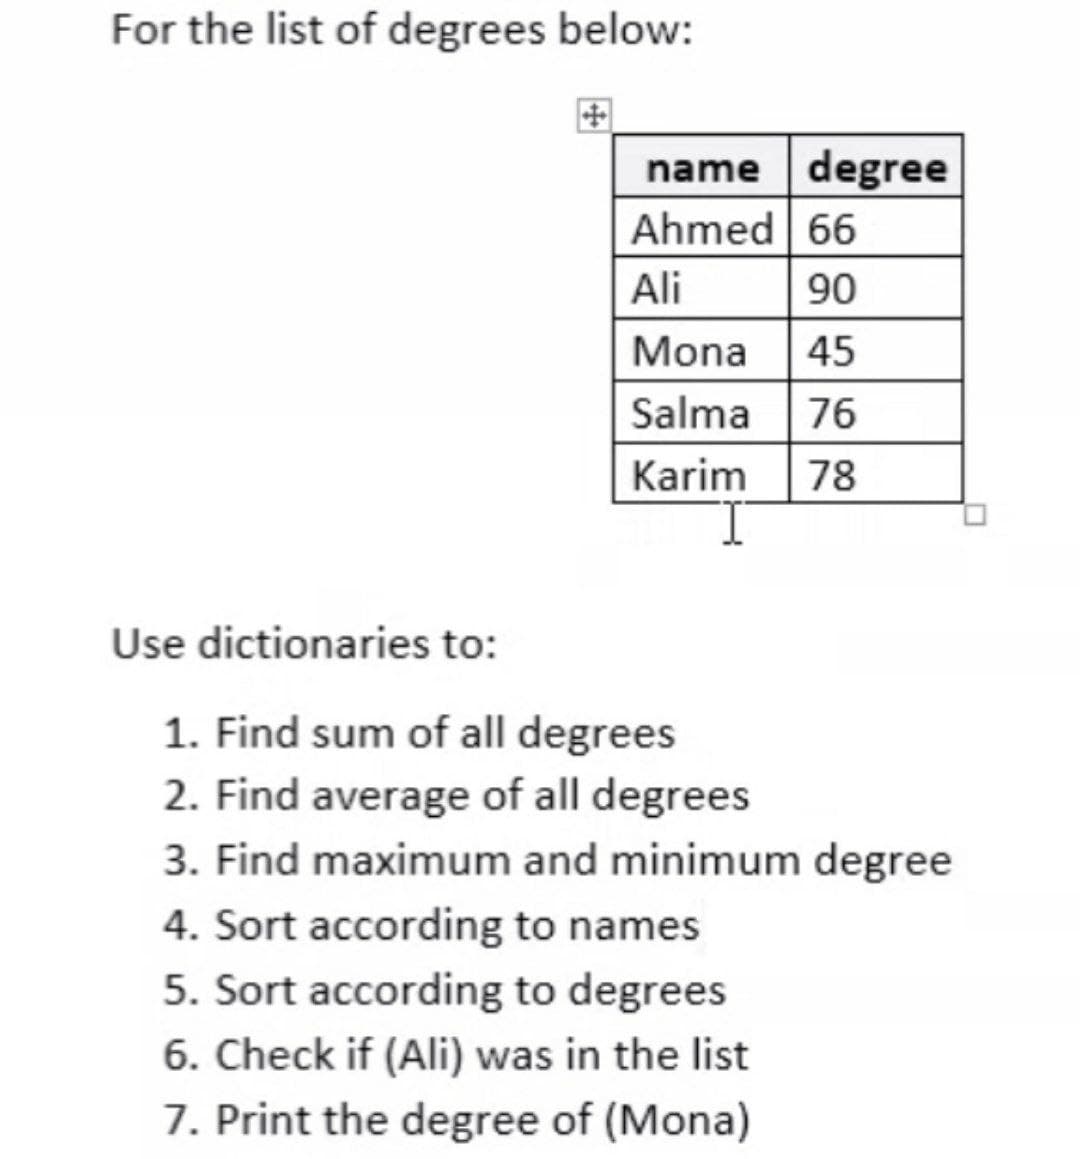 For the list of degrees below:
name degree
Ahmed 66
Ali
90
Mona
45
Salma
76
Karim
78
Use dictionaries to:
1. Find sum of all degrees
2. Find average of all degrees
3. Find maximum and minimum degree
4. Sort according to names
5. Sort according to degrees
6. Check if (Ali) was in the list
7. Print the degree of (Mona)
